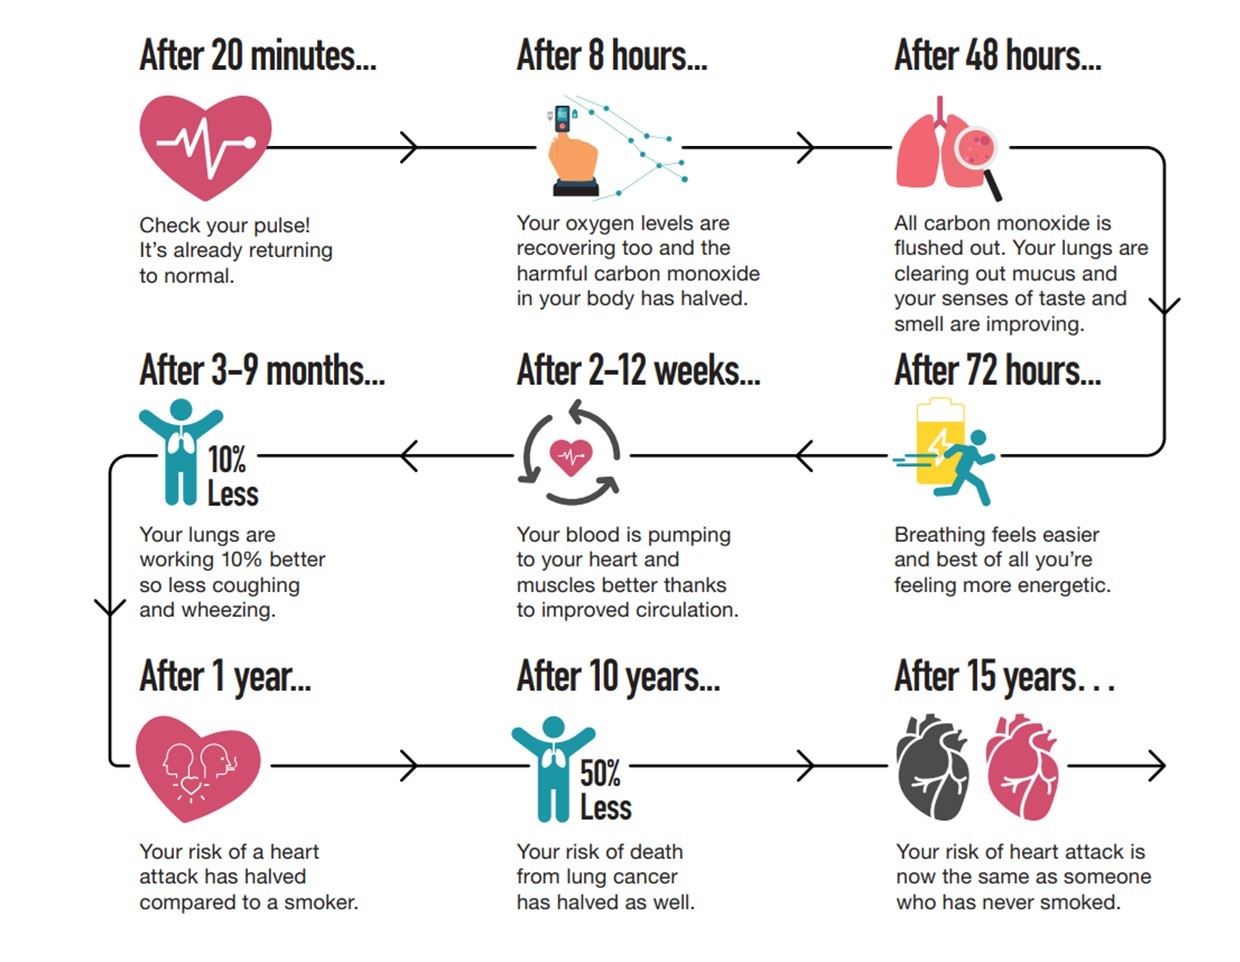 flow chart of what happens in your body at each stage from stopping smoking from 20 minutes to 15 years